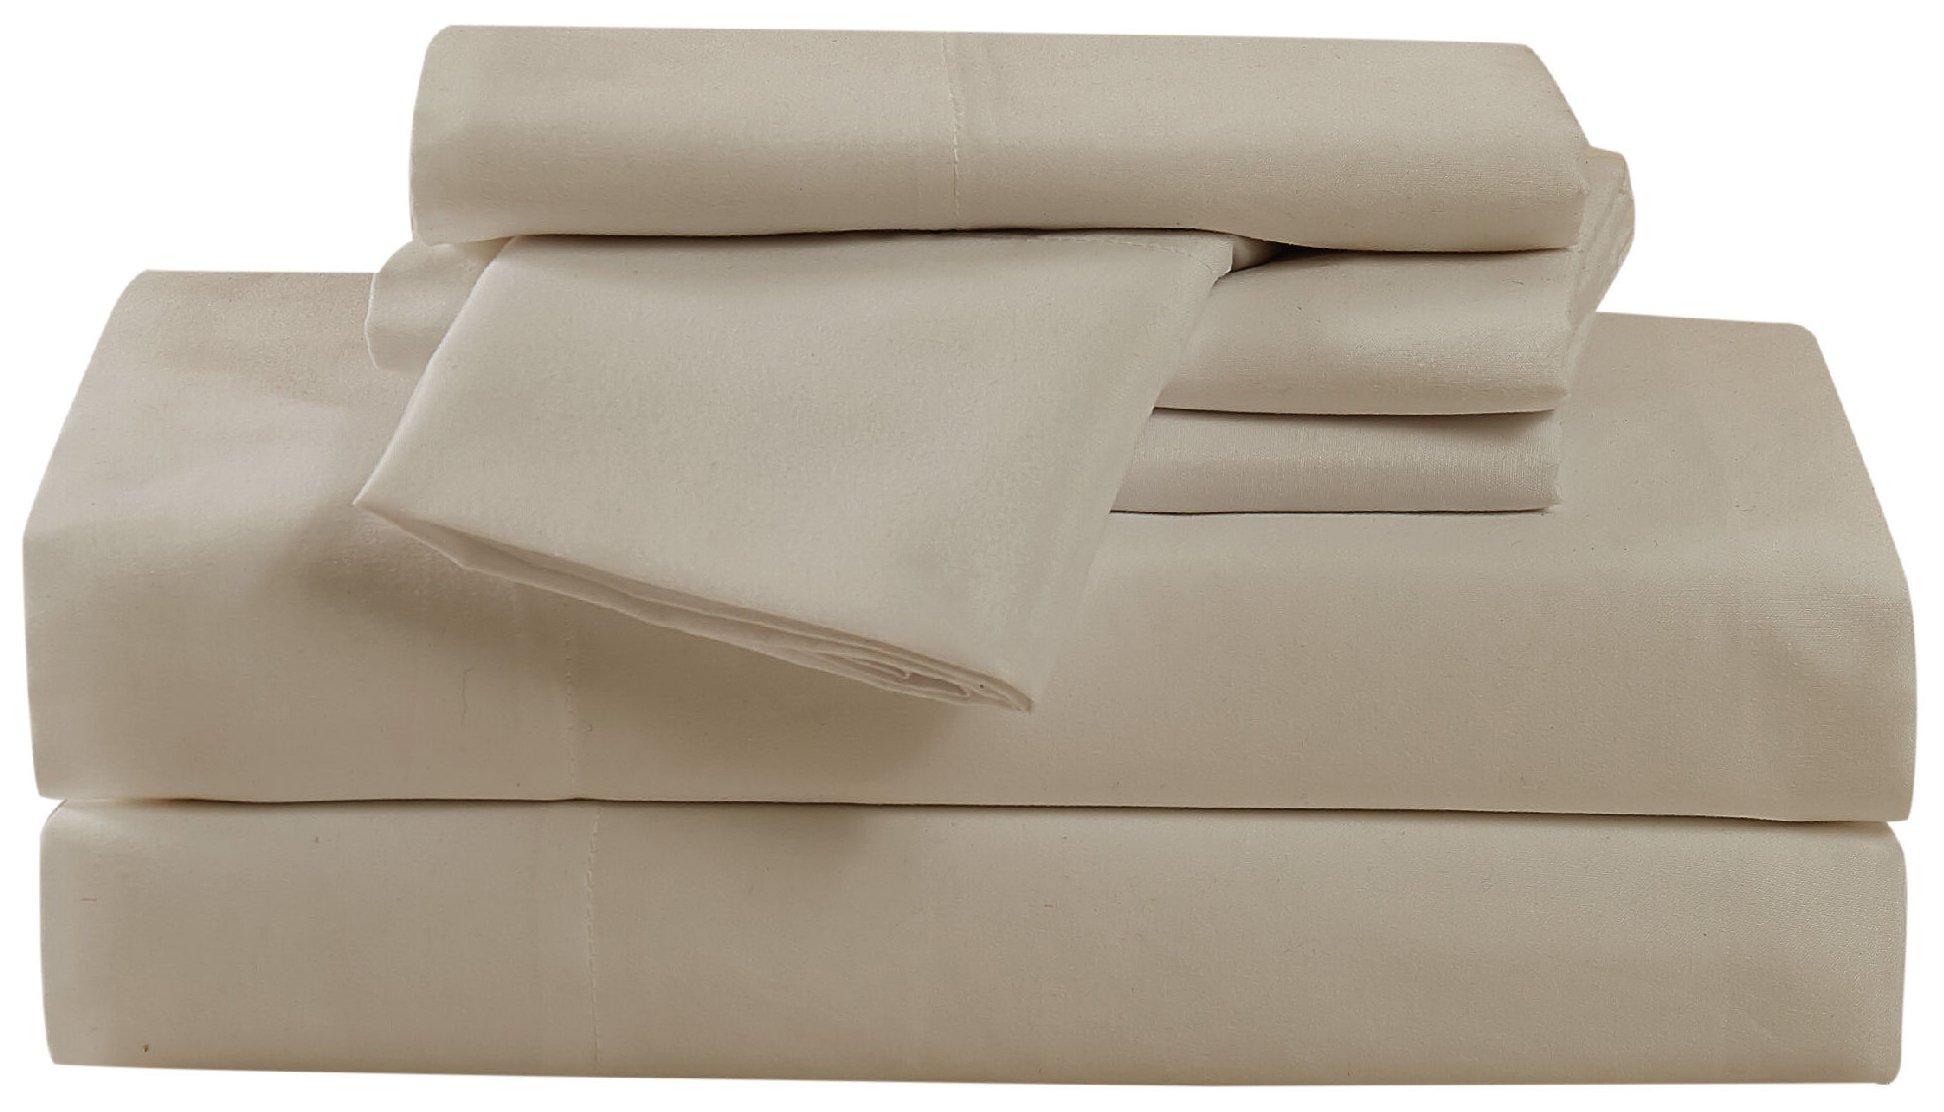 Cannon Solid Sheet Set